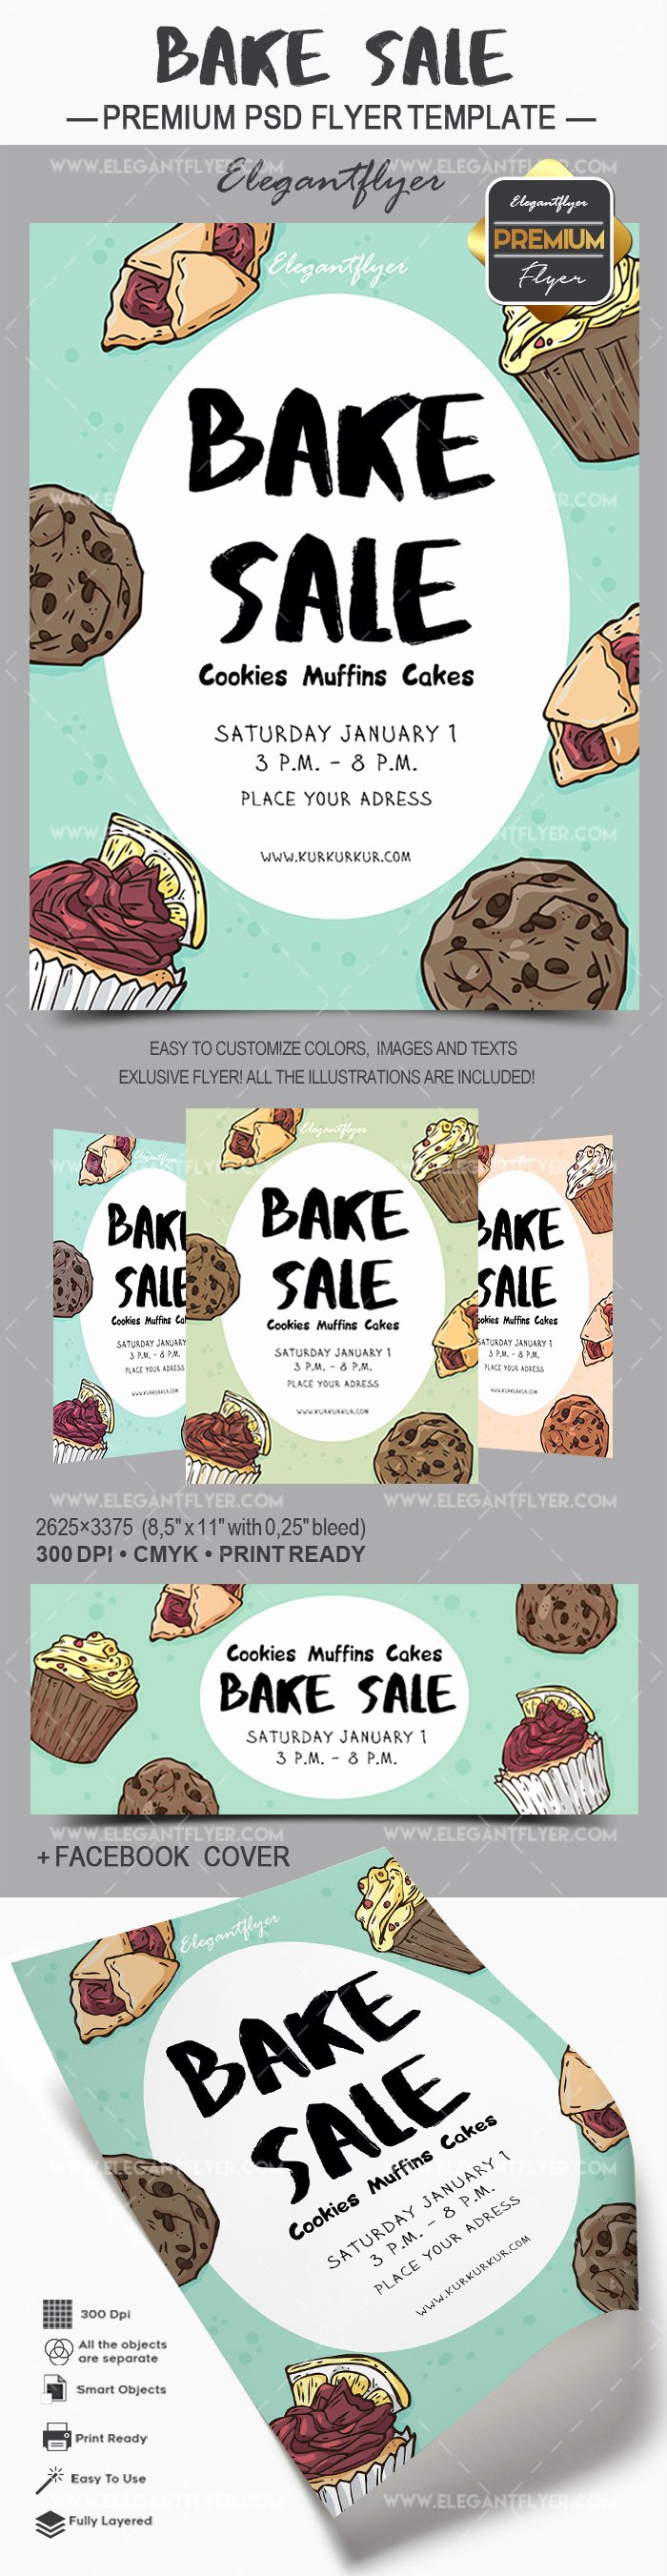 Bake Sale Flyer Templates Free Unique Flyer for Bake Sale Cookies Muffins Cakes – by Elegantflyer